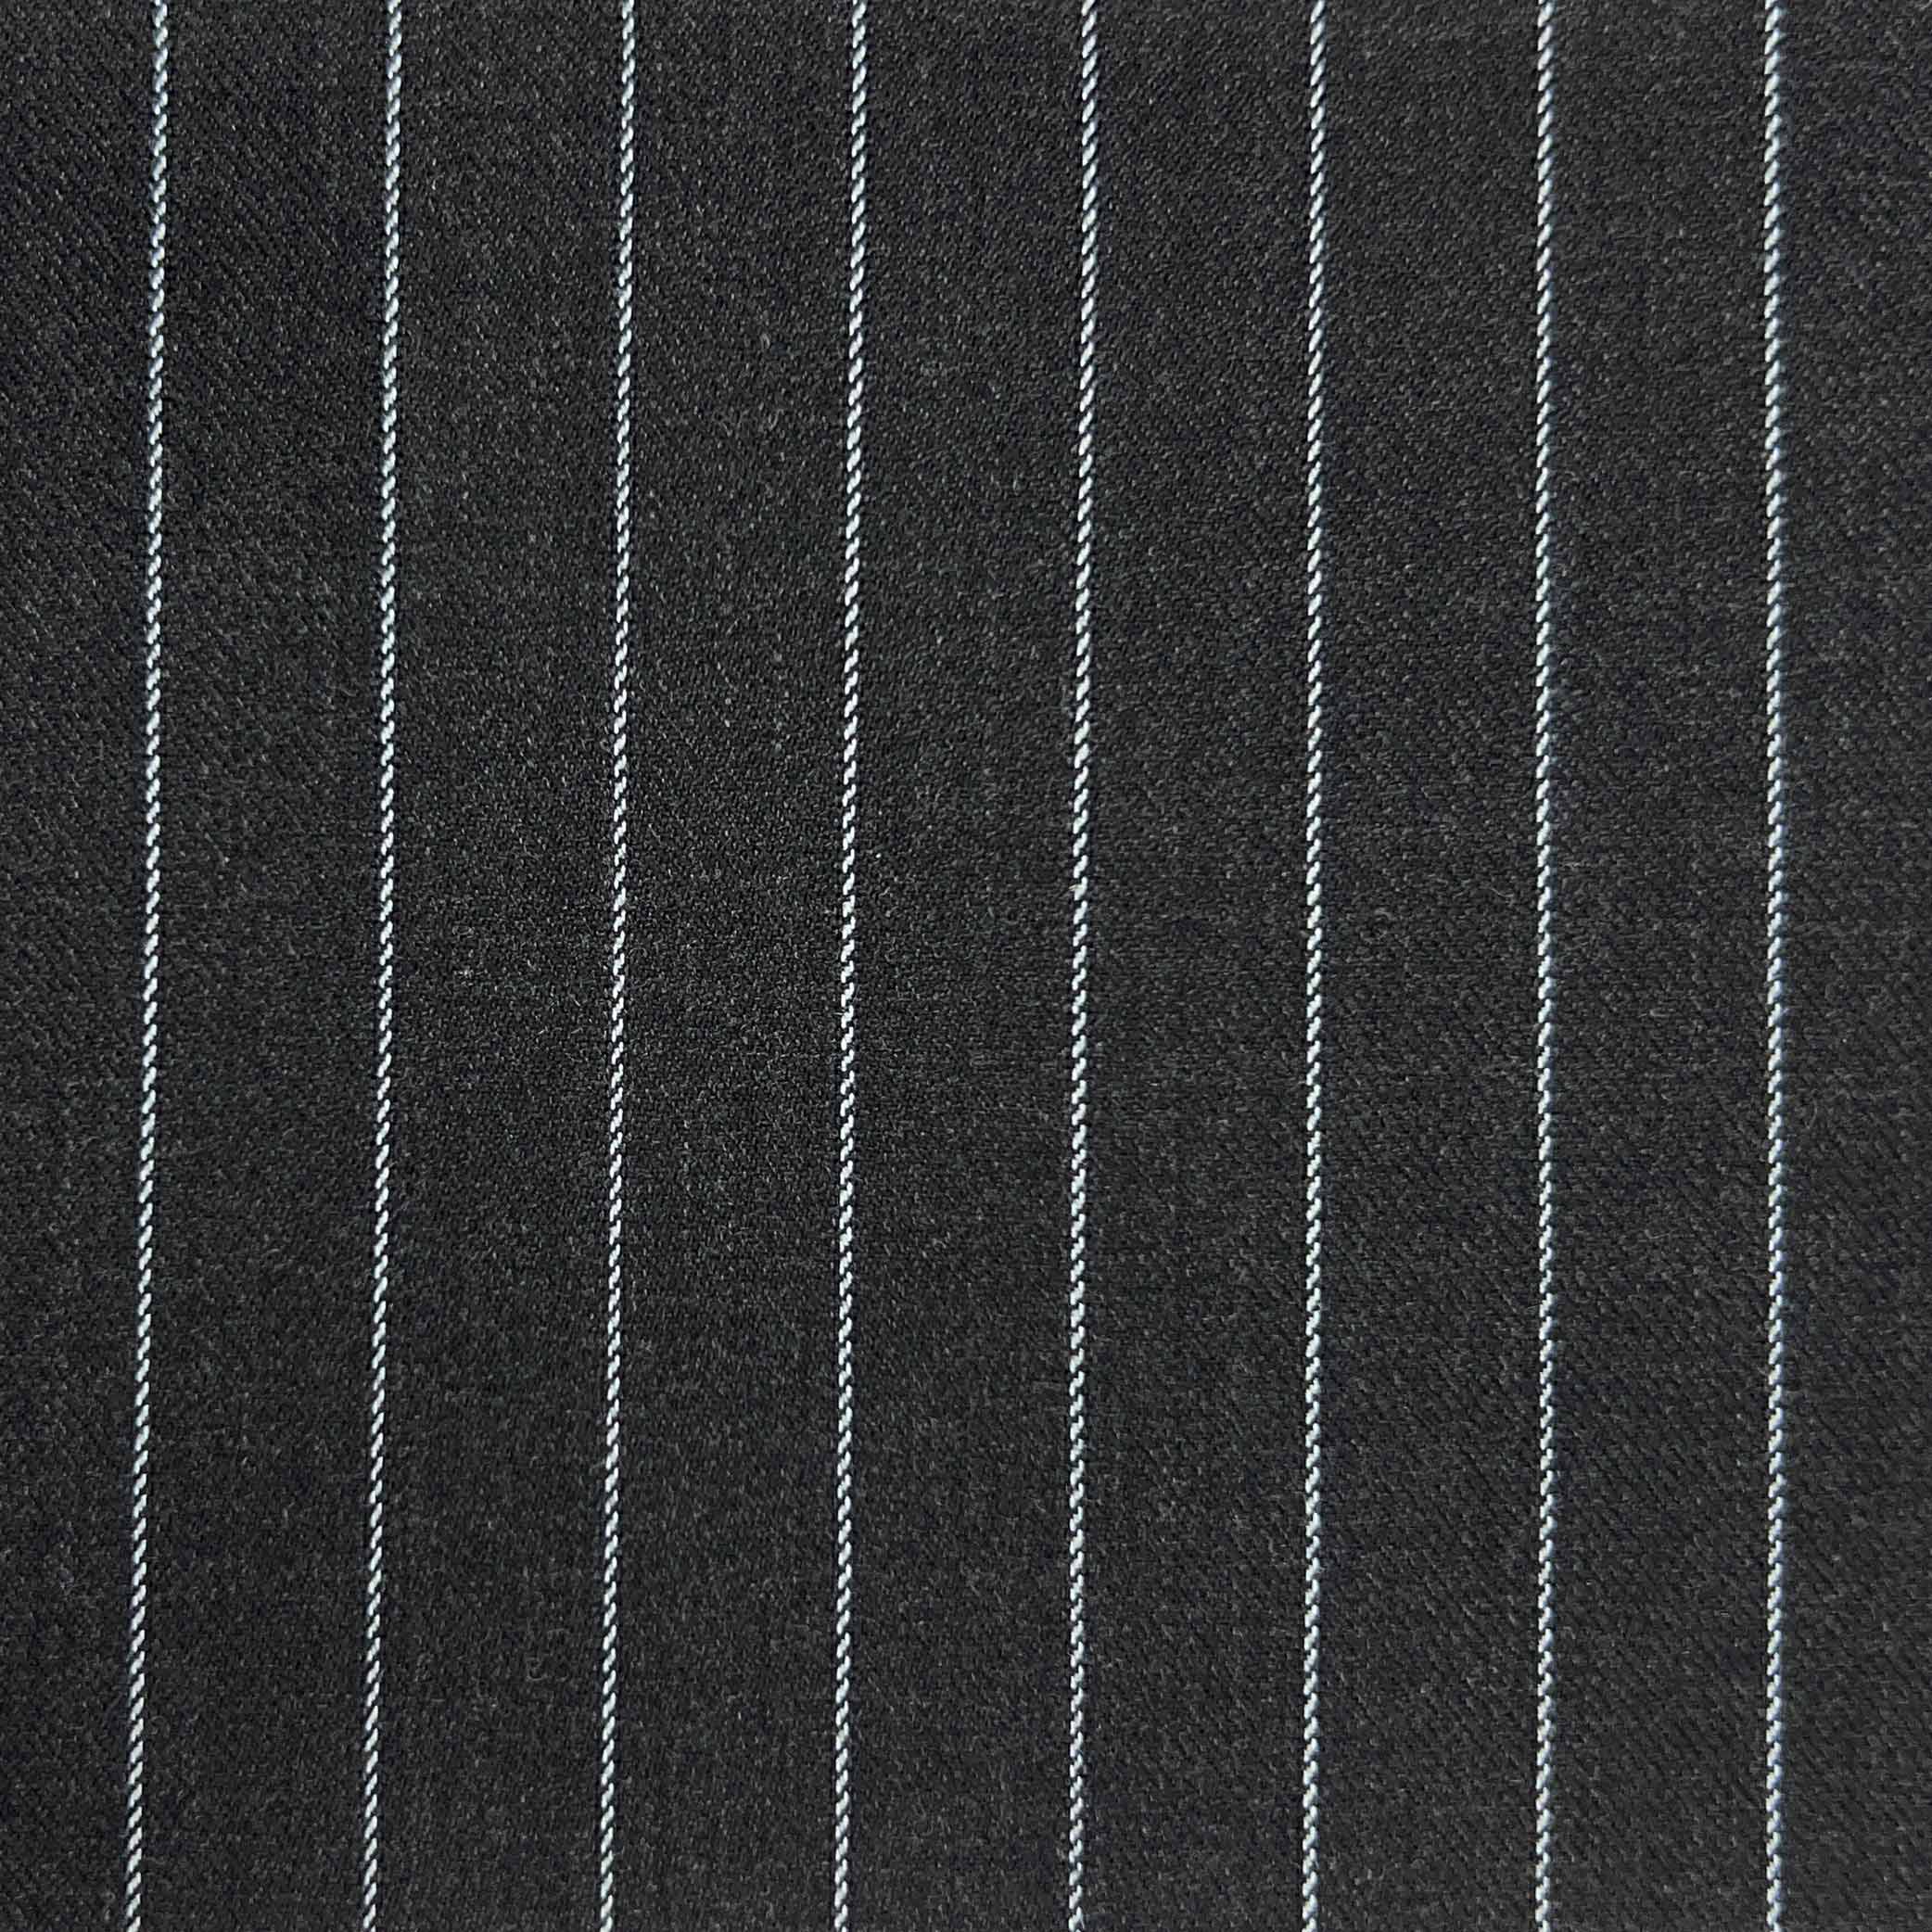 Westwood Hart Online Custom Hand Tailor Suits Sportcoats Trousers Waistcoats Overcoats Dark Grey With 1/2" Wide Stripes Design